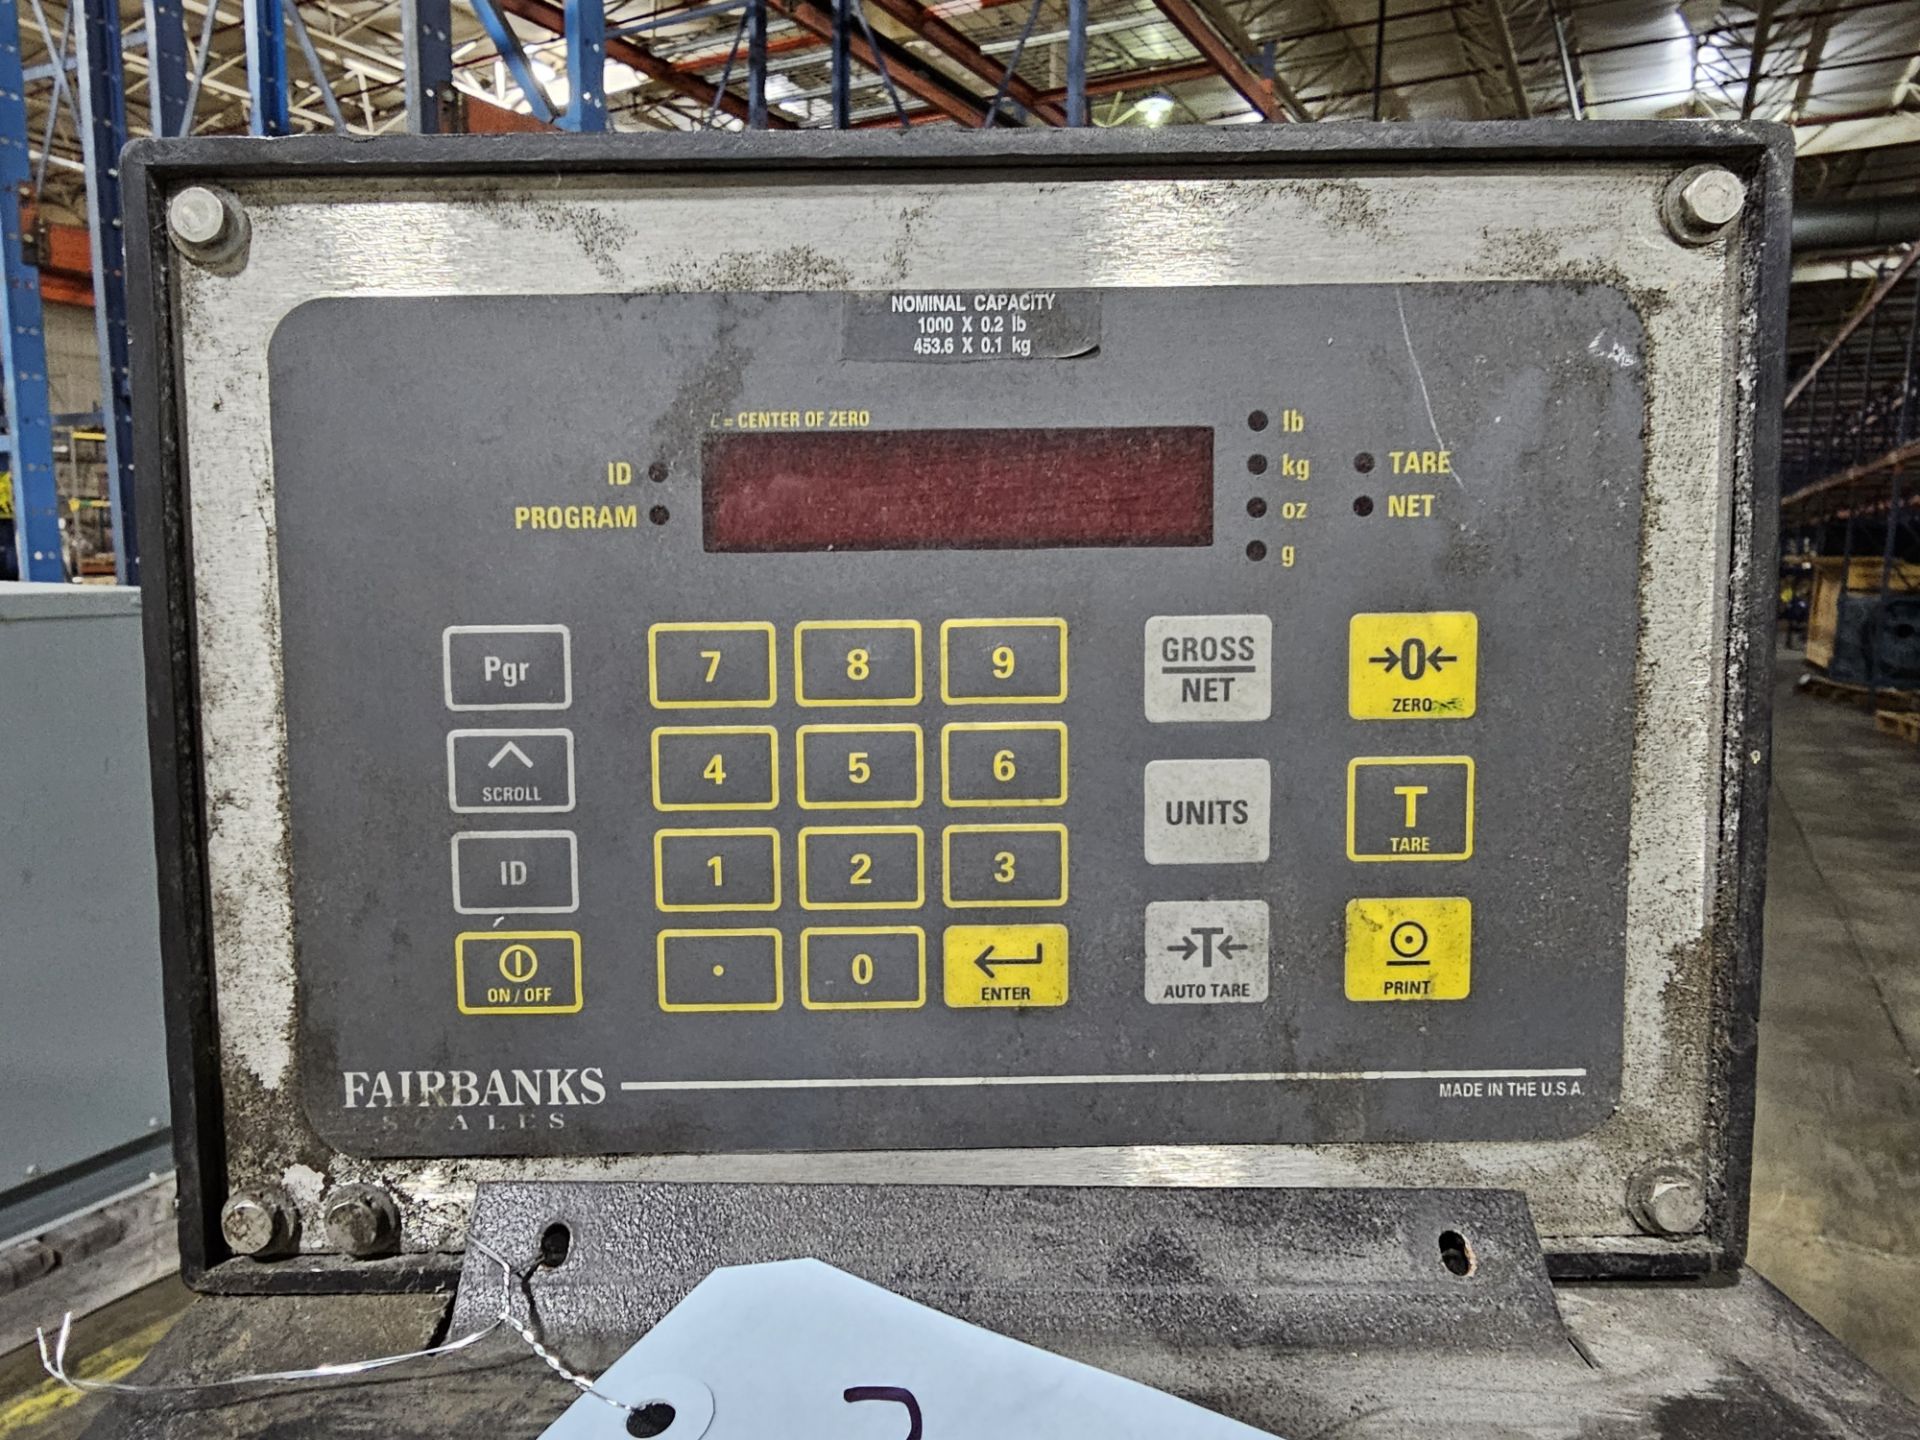 Fairbanks Scales Series 2300 Industrial Scale - Image 4 of 5